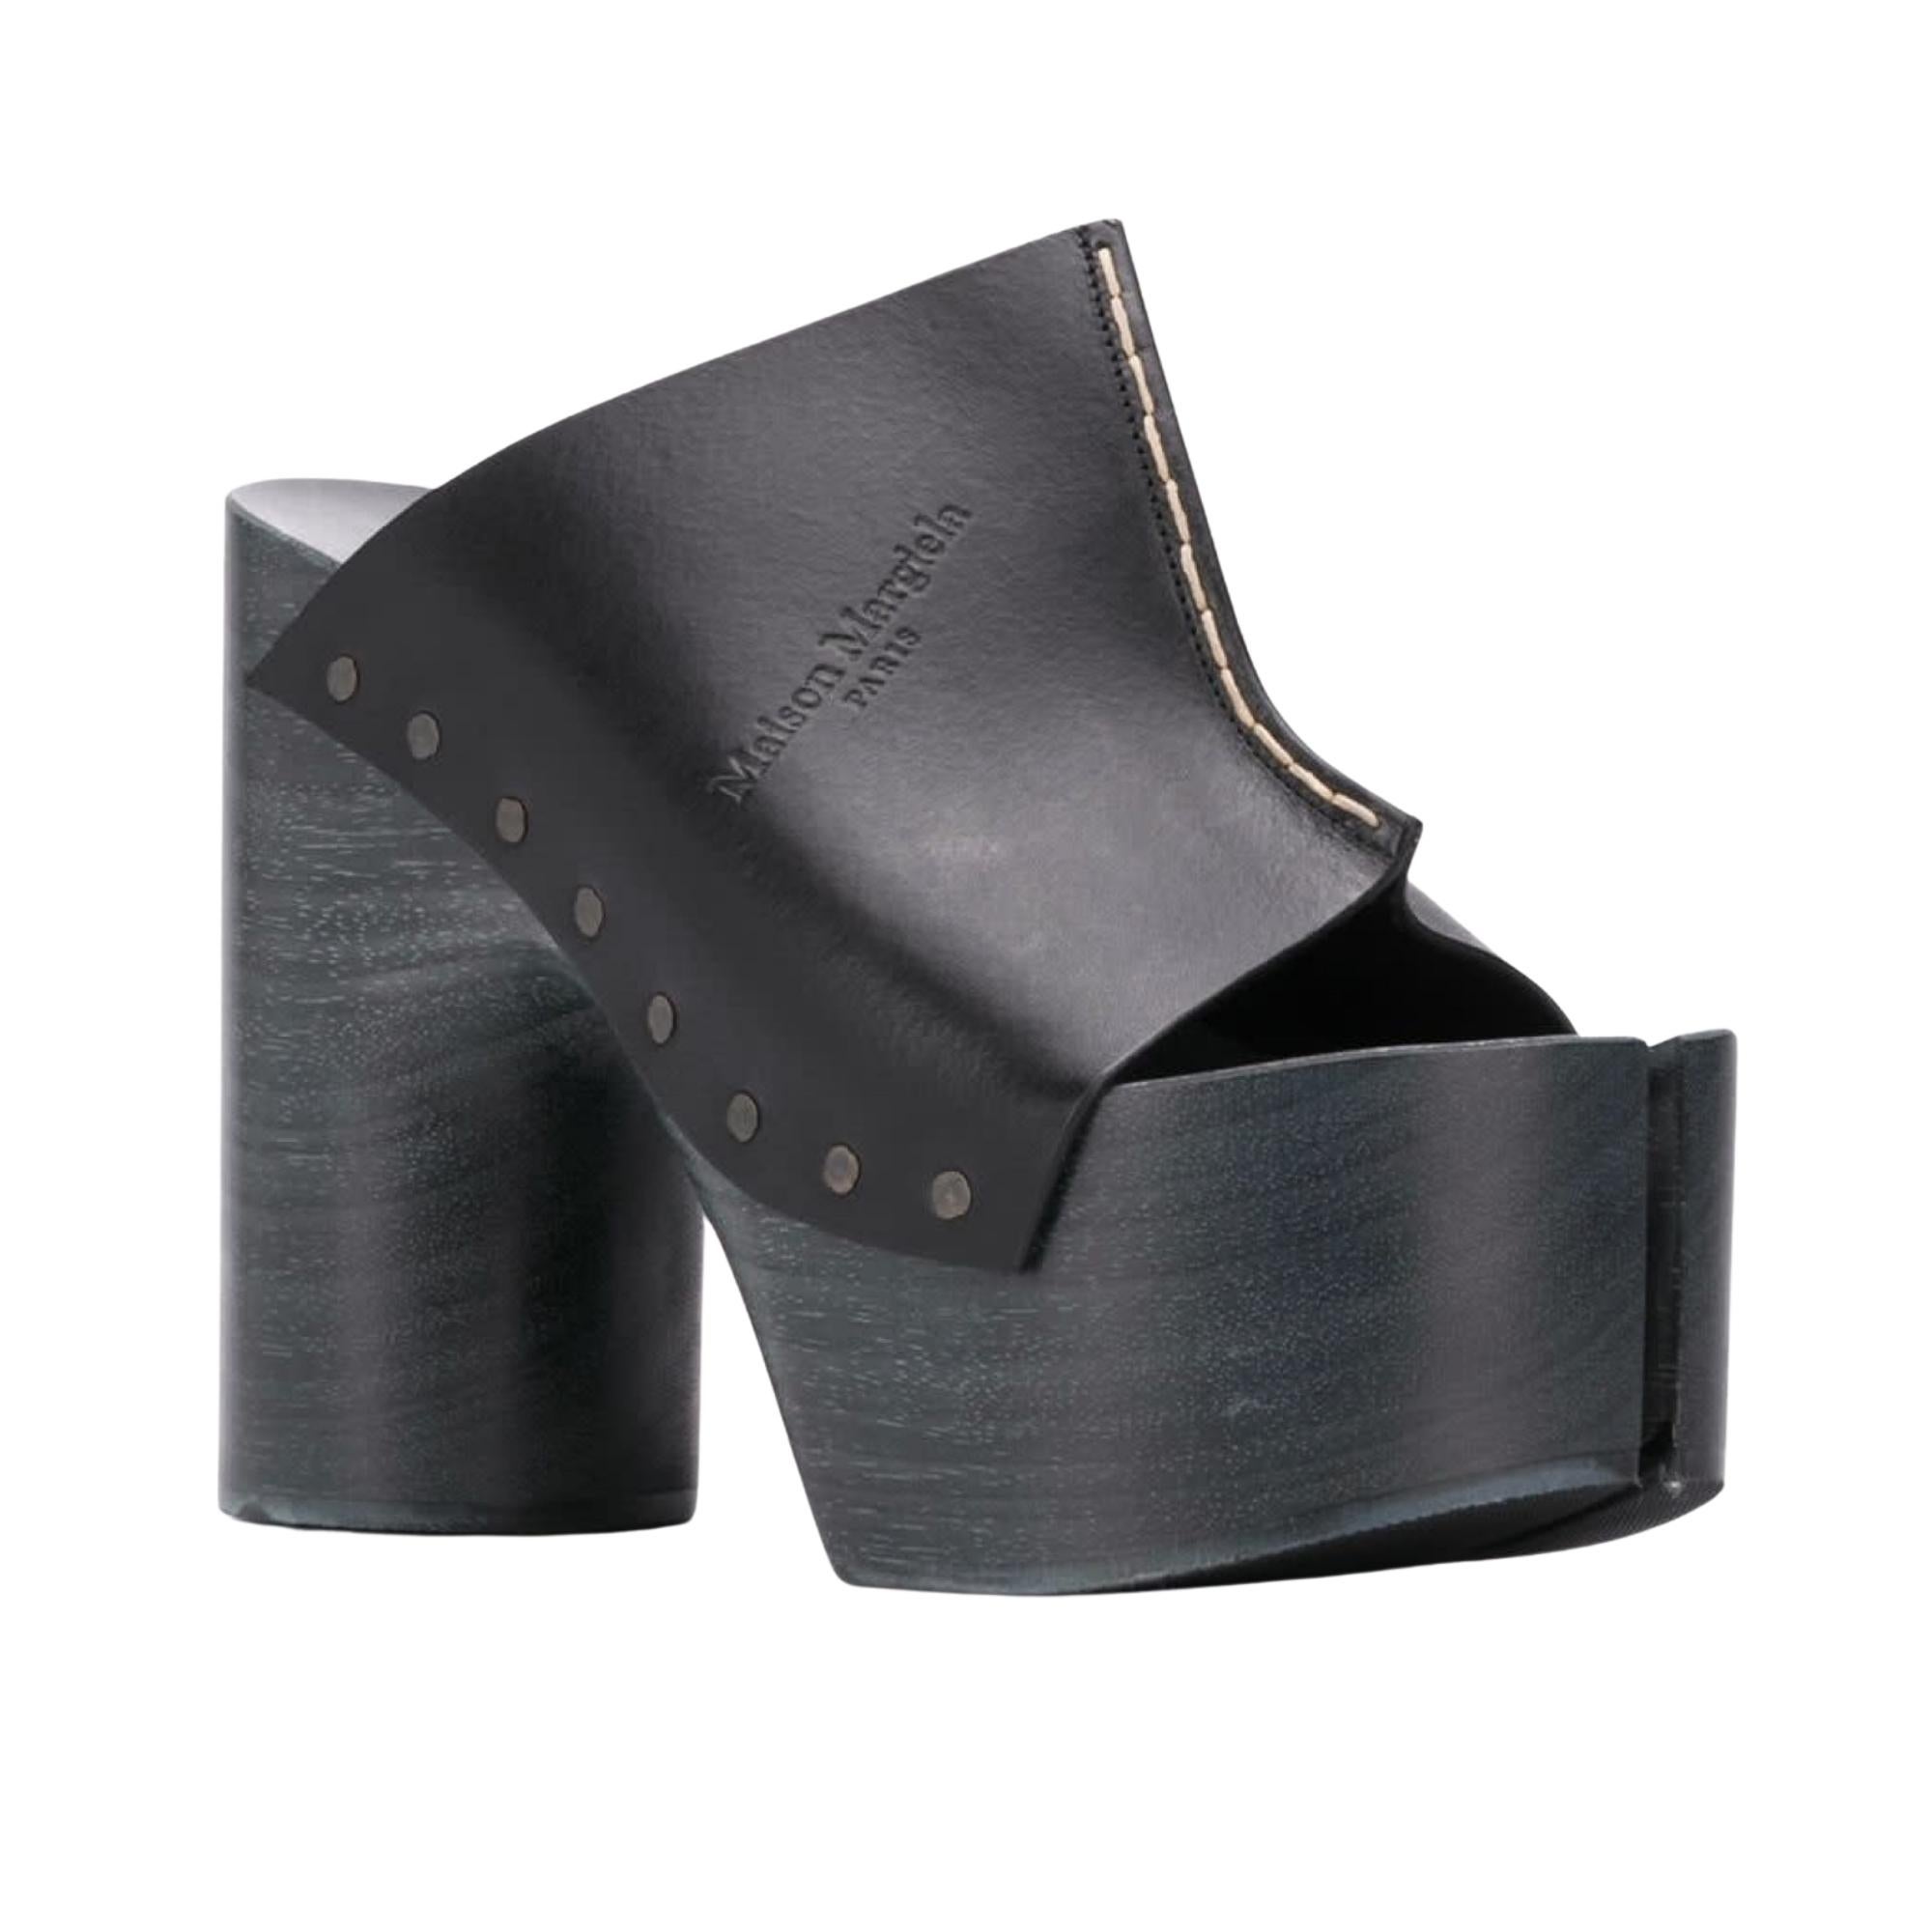 Champions of making the camel toe fashion, Maison Margiela incorporate the Tabi toe into these sky-high clog heels for added drama.
The elevated heels feature leather, contrast stitching, round toe, geometric block wooden heel, wood platform and a